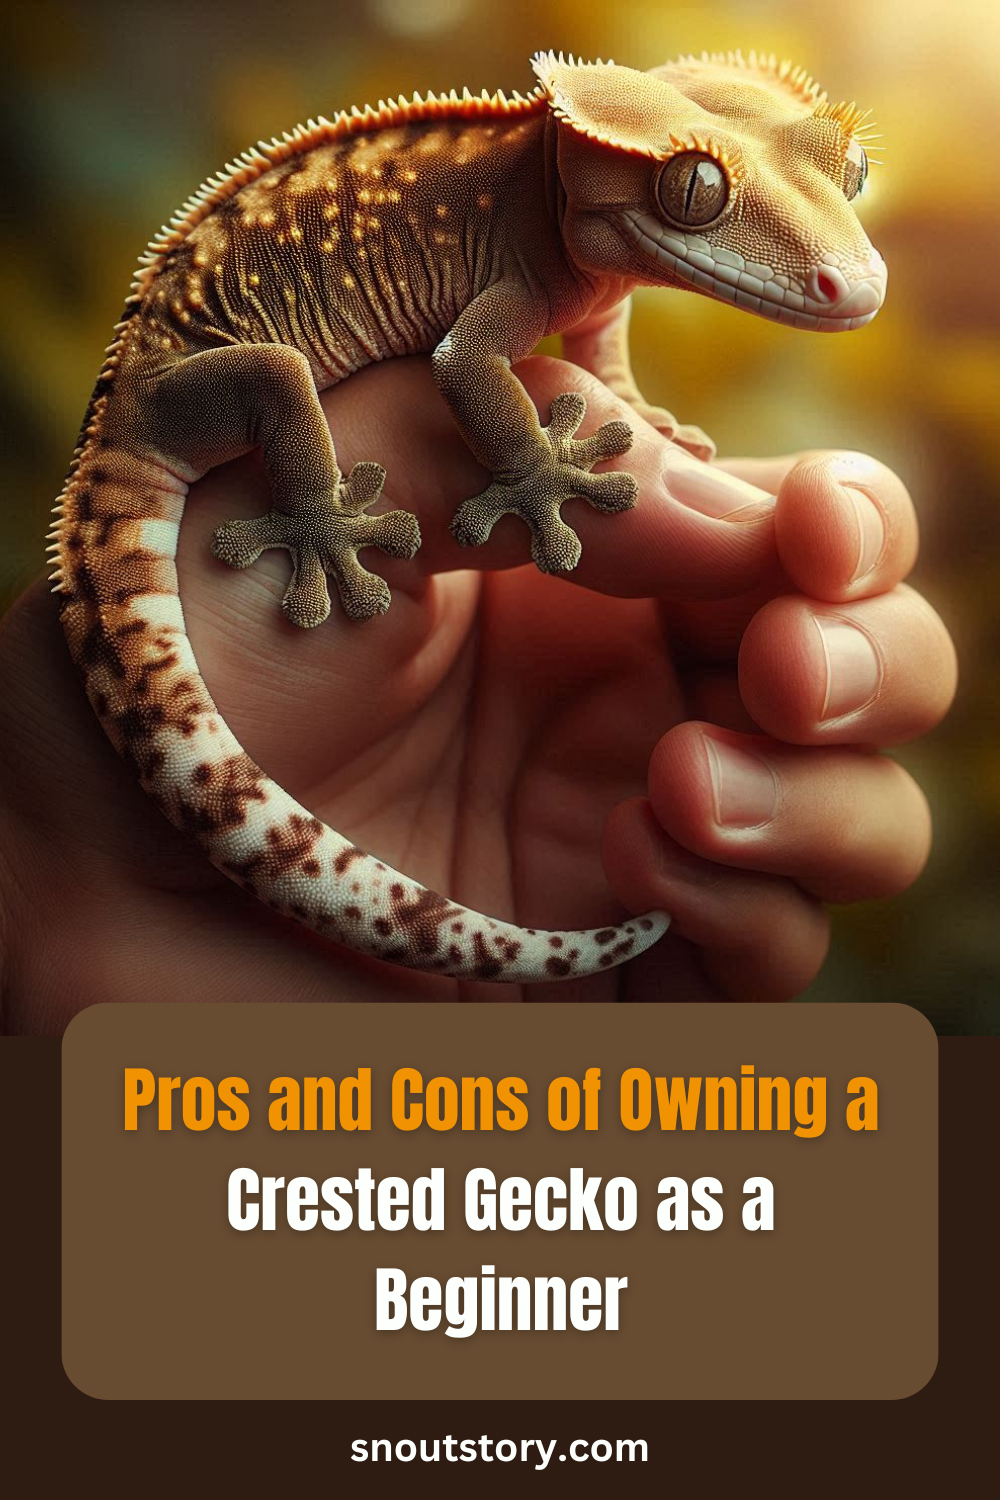 Pros and Cons of owning a Crested Gecko